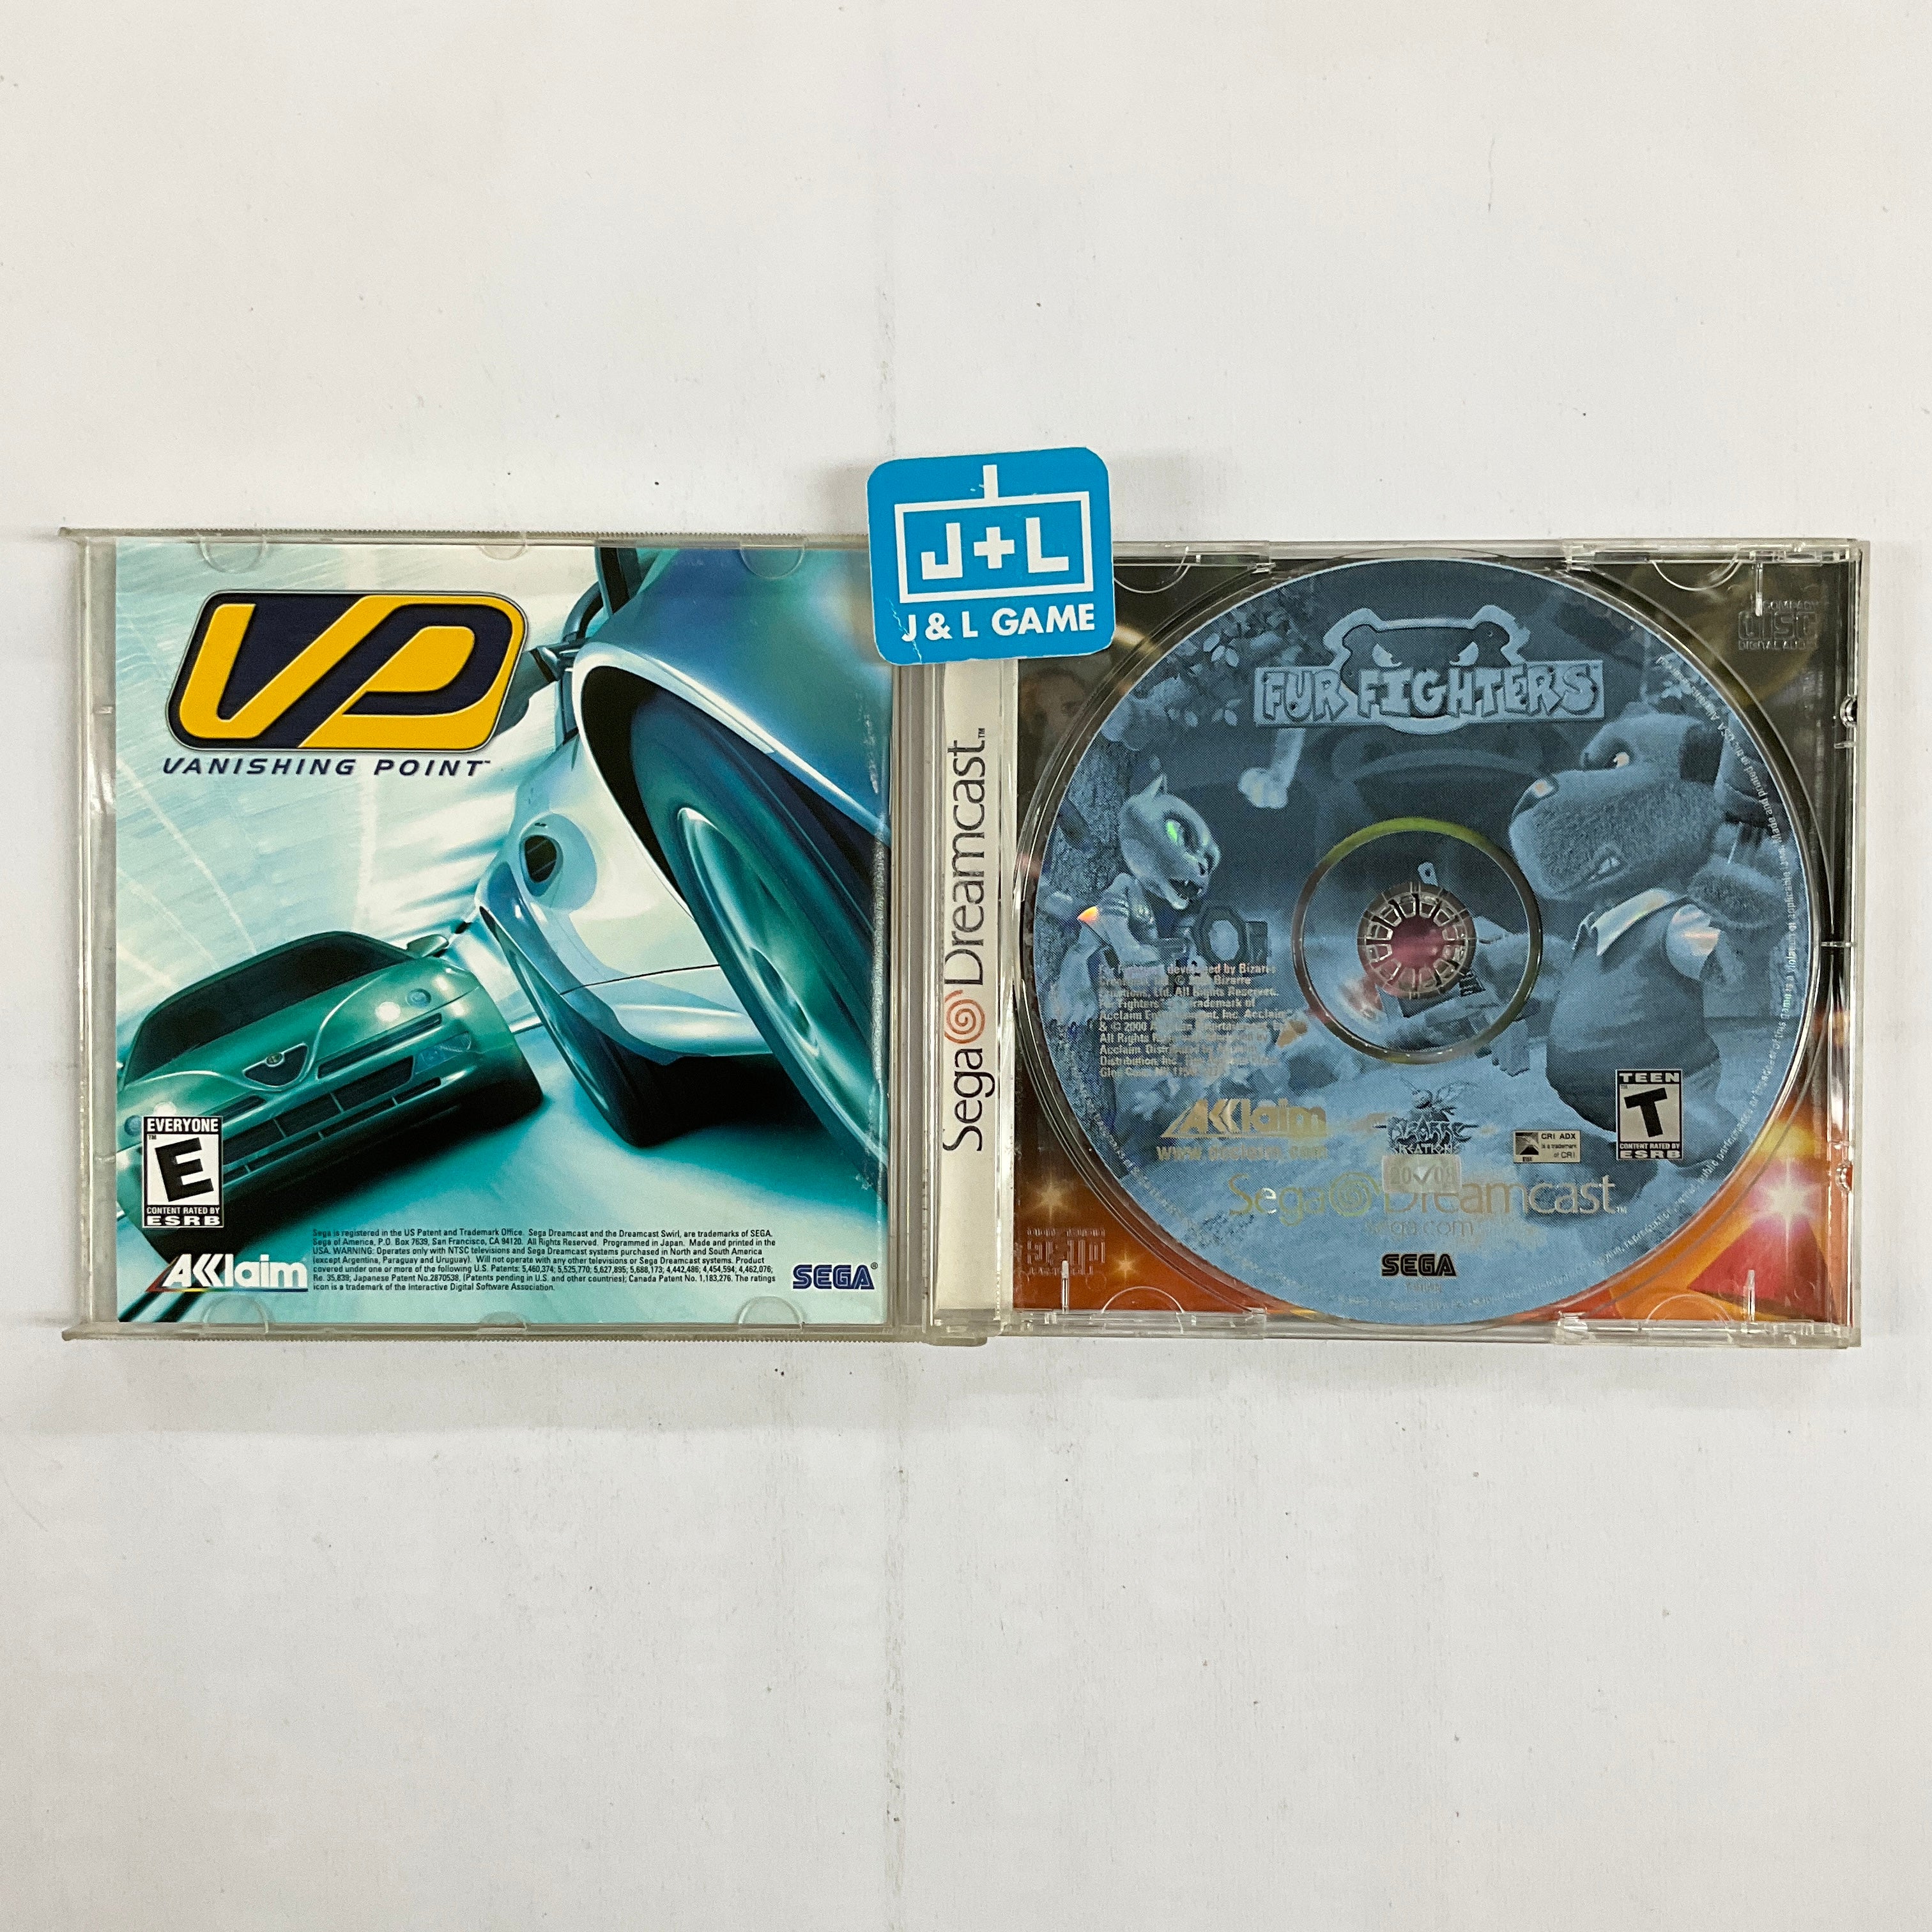 Fur Fighters - (DC) SEGA Dreamcast [Pre-Owned] Video Games Acclaim   